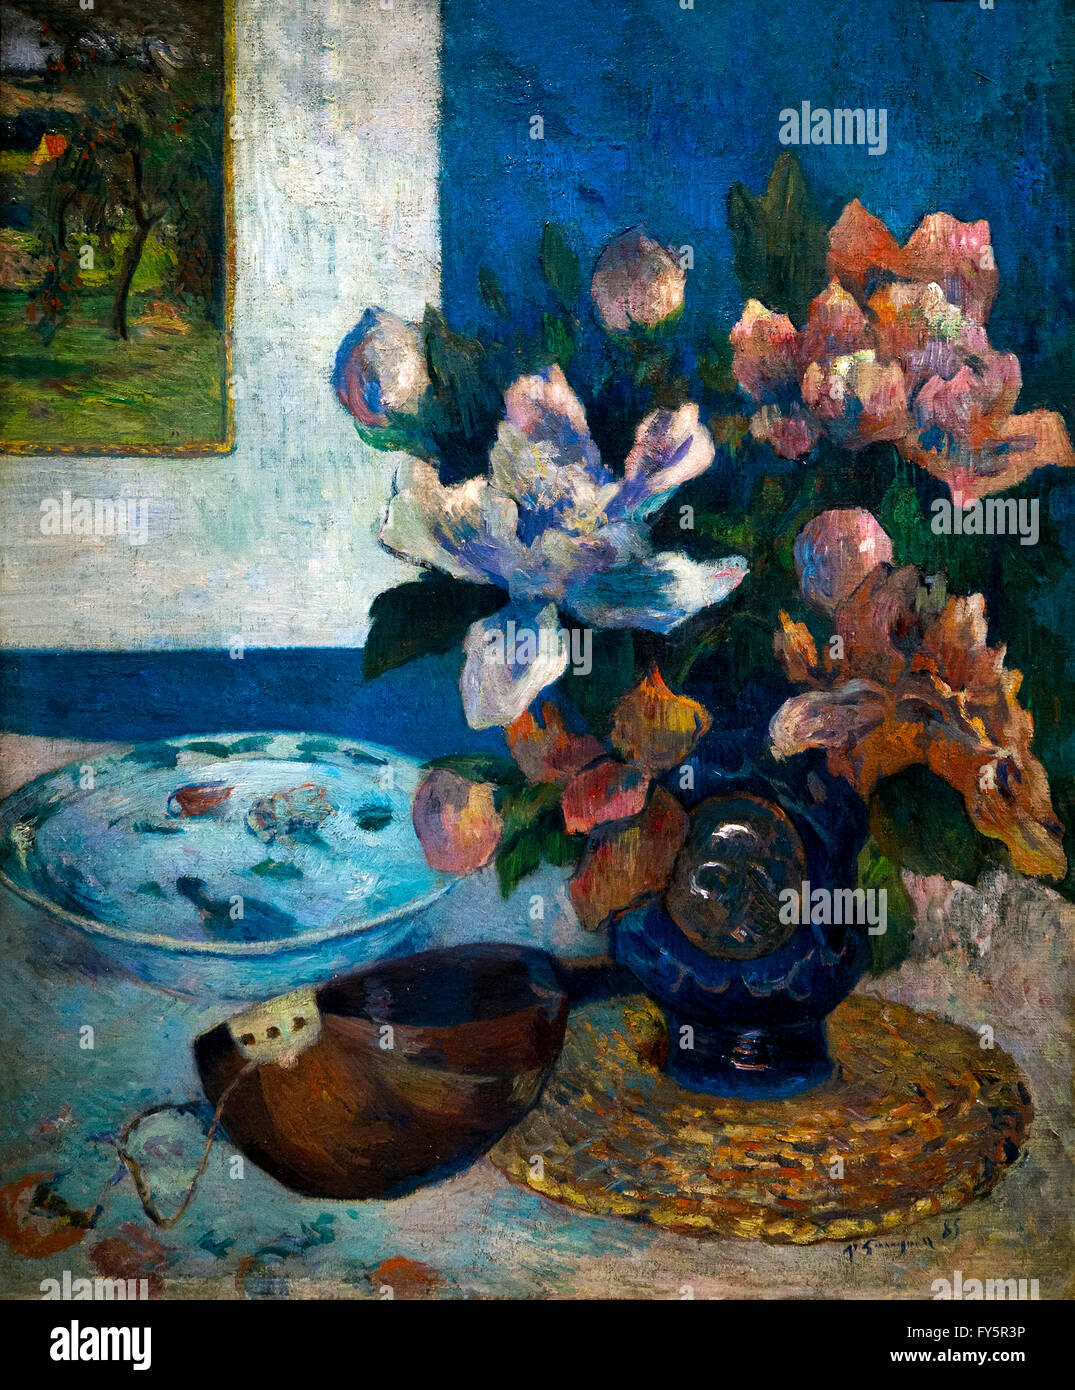 Still life with mandolin, Nature morte a la mandoline, by Paul Gauguin, 1885, Musee D'Orsay, Paris, France, Europe Stock Photo